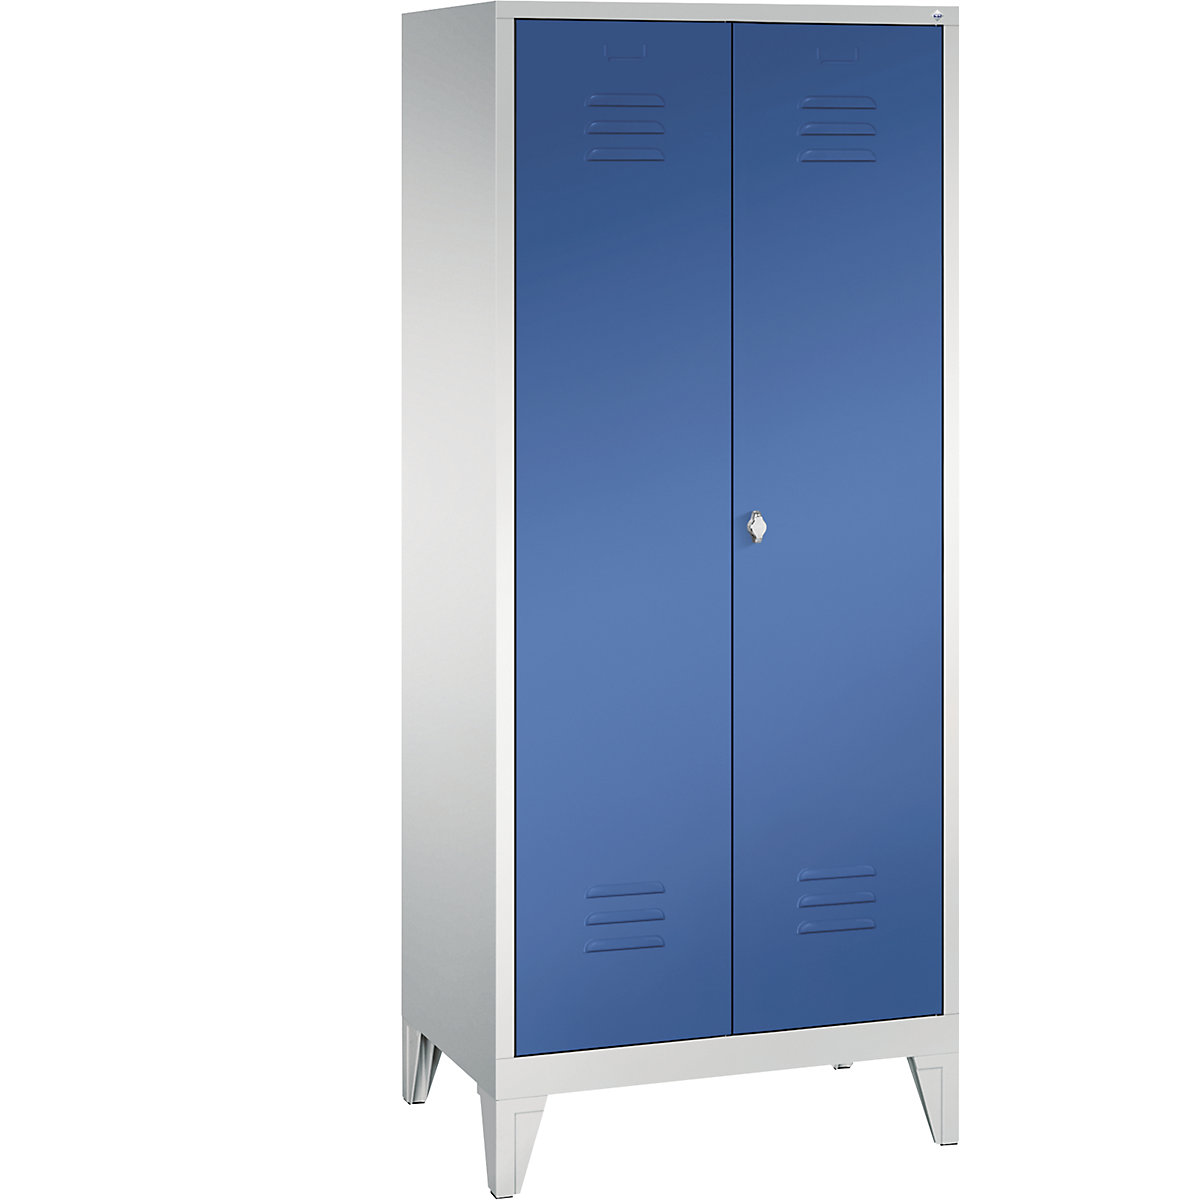 CLASSIC equipment cupboard with feet – C+P, 2 compartments, compartment width 400 mm, light grey / gentian blue-4